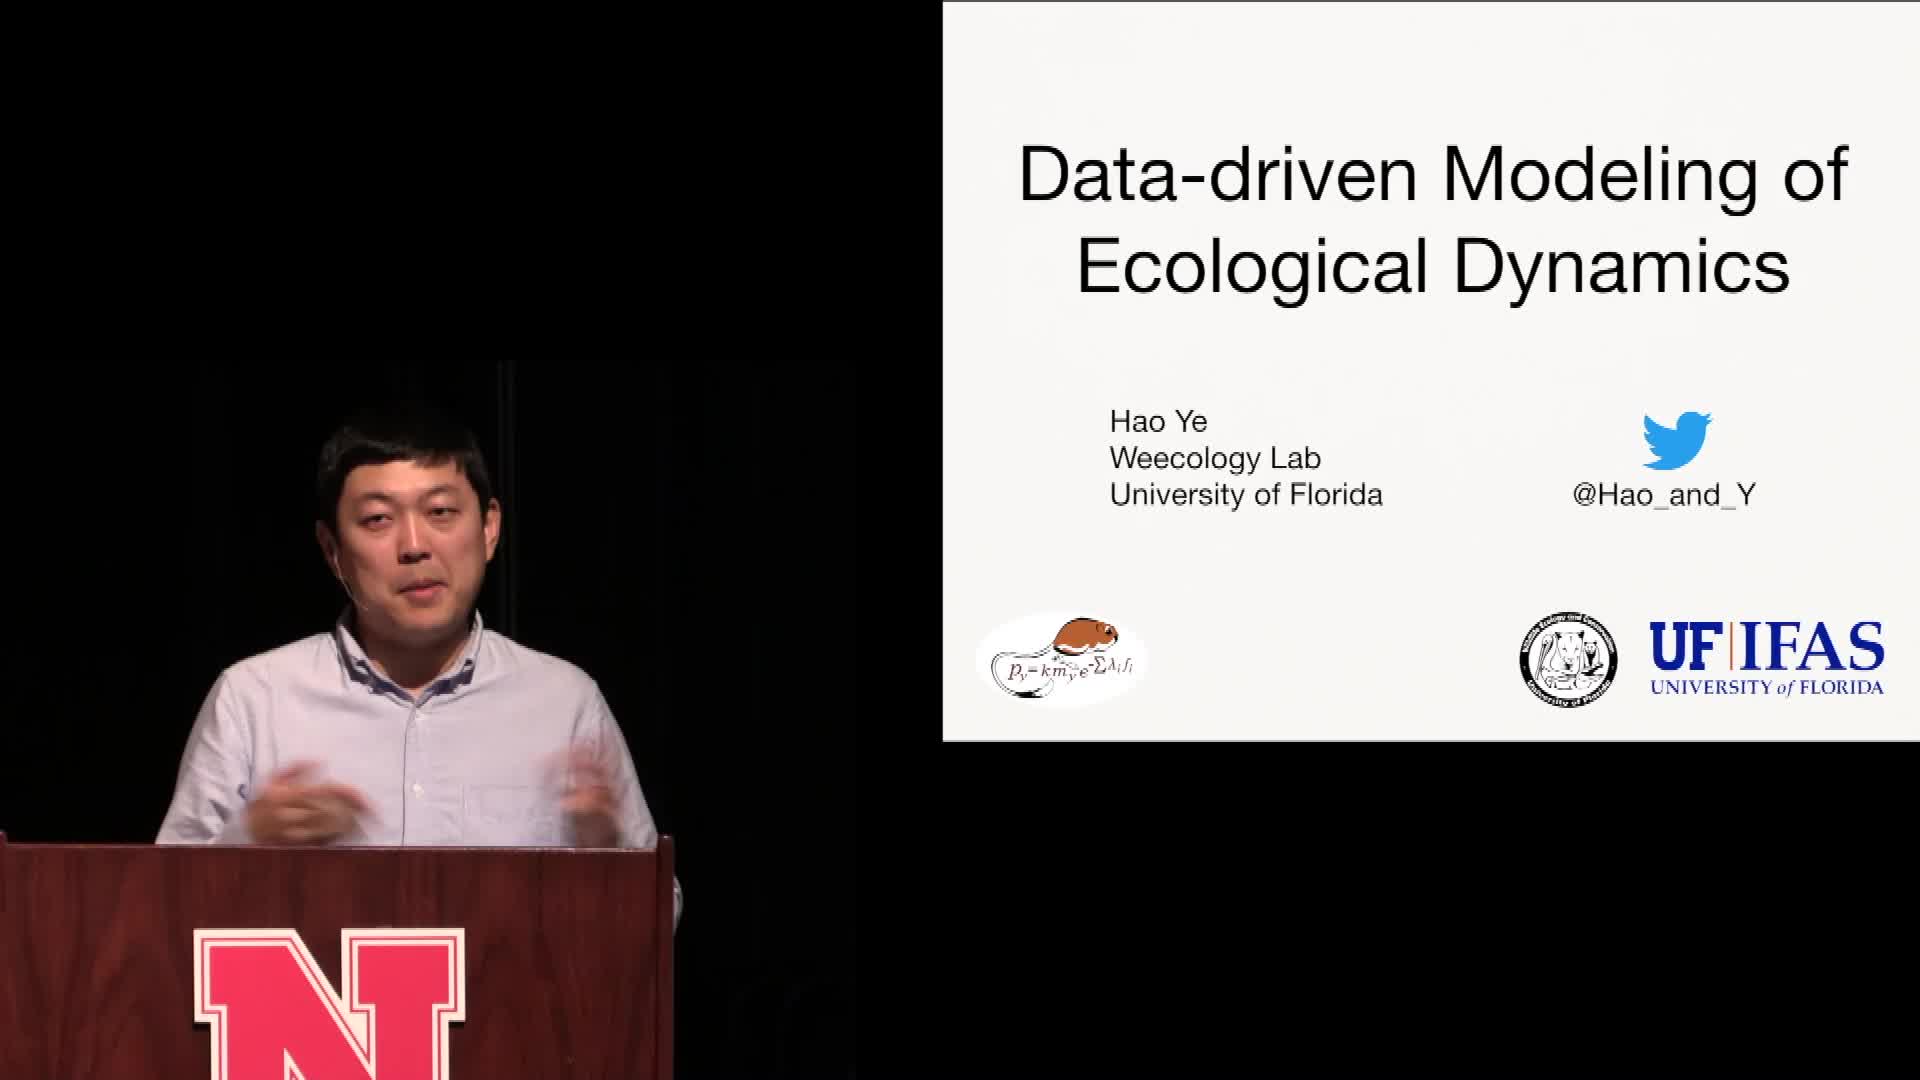 Data-driven Modeling of Ecological Dynamics